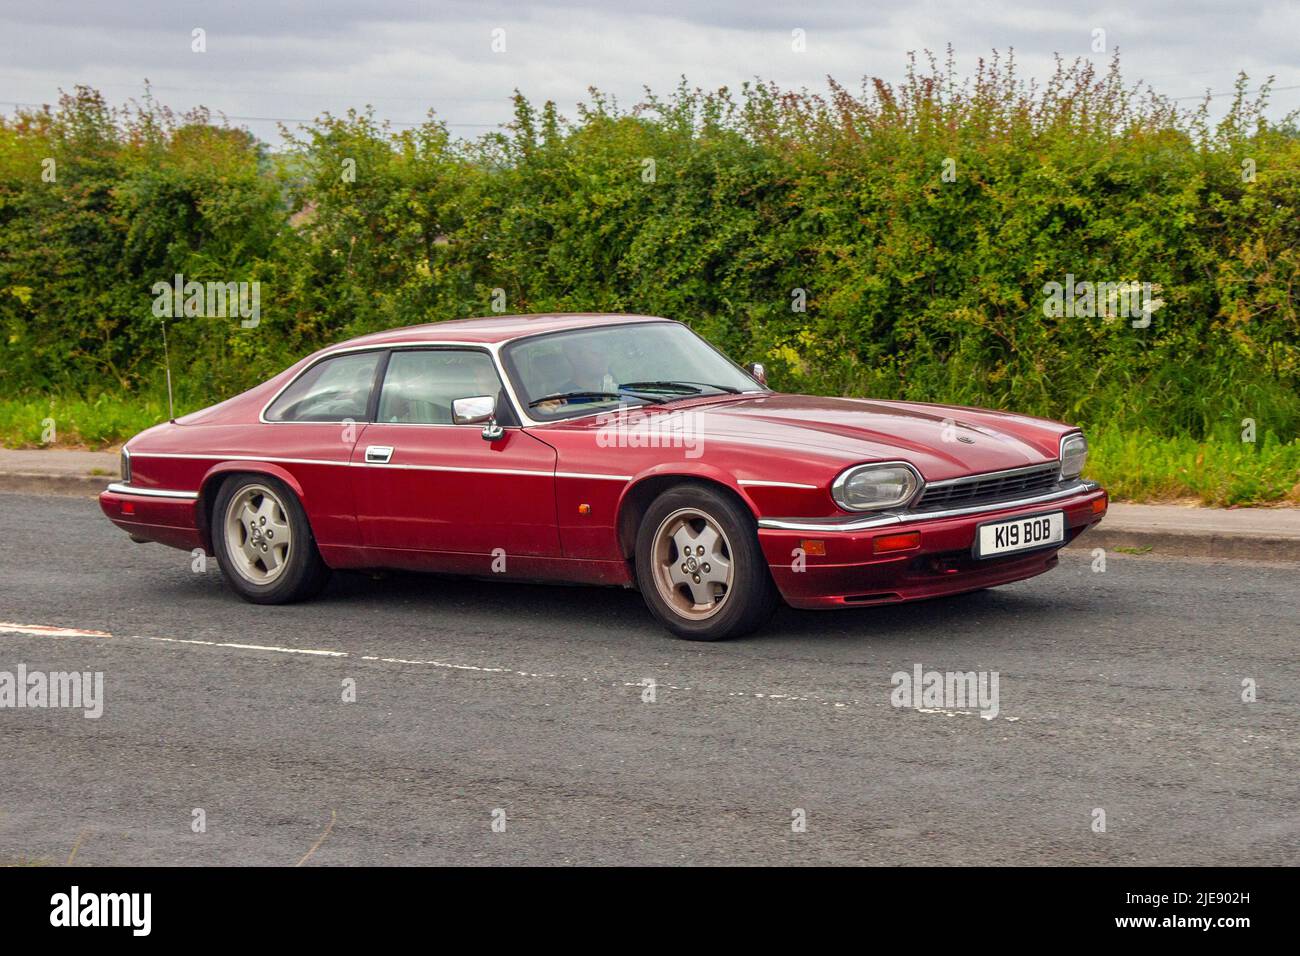 1993, 90s, nineties red British Jaguar Xj-S 4.0 Auto. 3980cc petrol coupe; Antique classic cars, vintage motors arriving at Hoghton Tower for the Supercar Summer Showtime car meet which is organised by Great British Motor Shows. Stock Photo